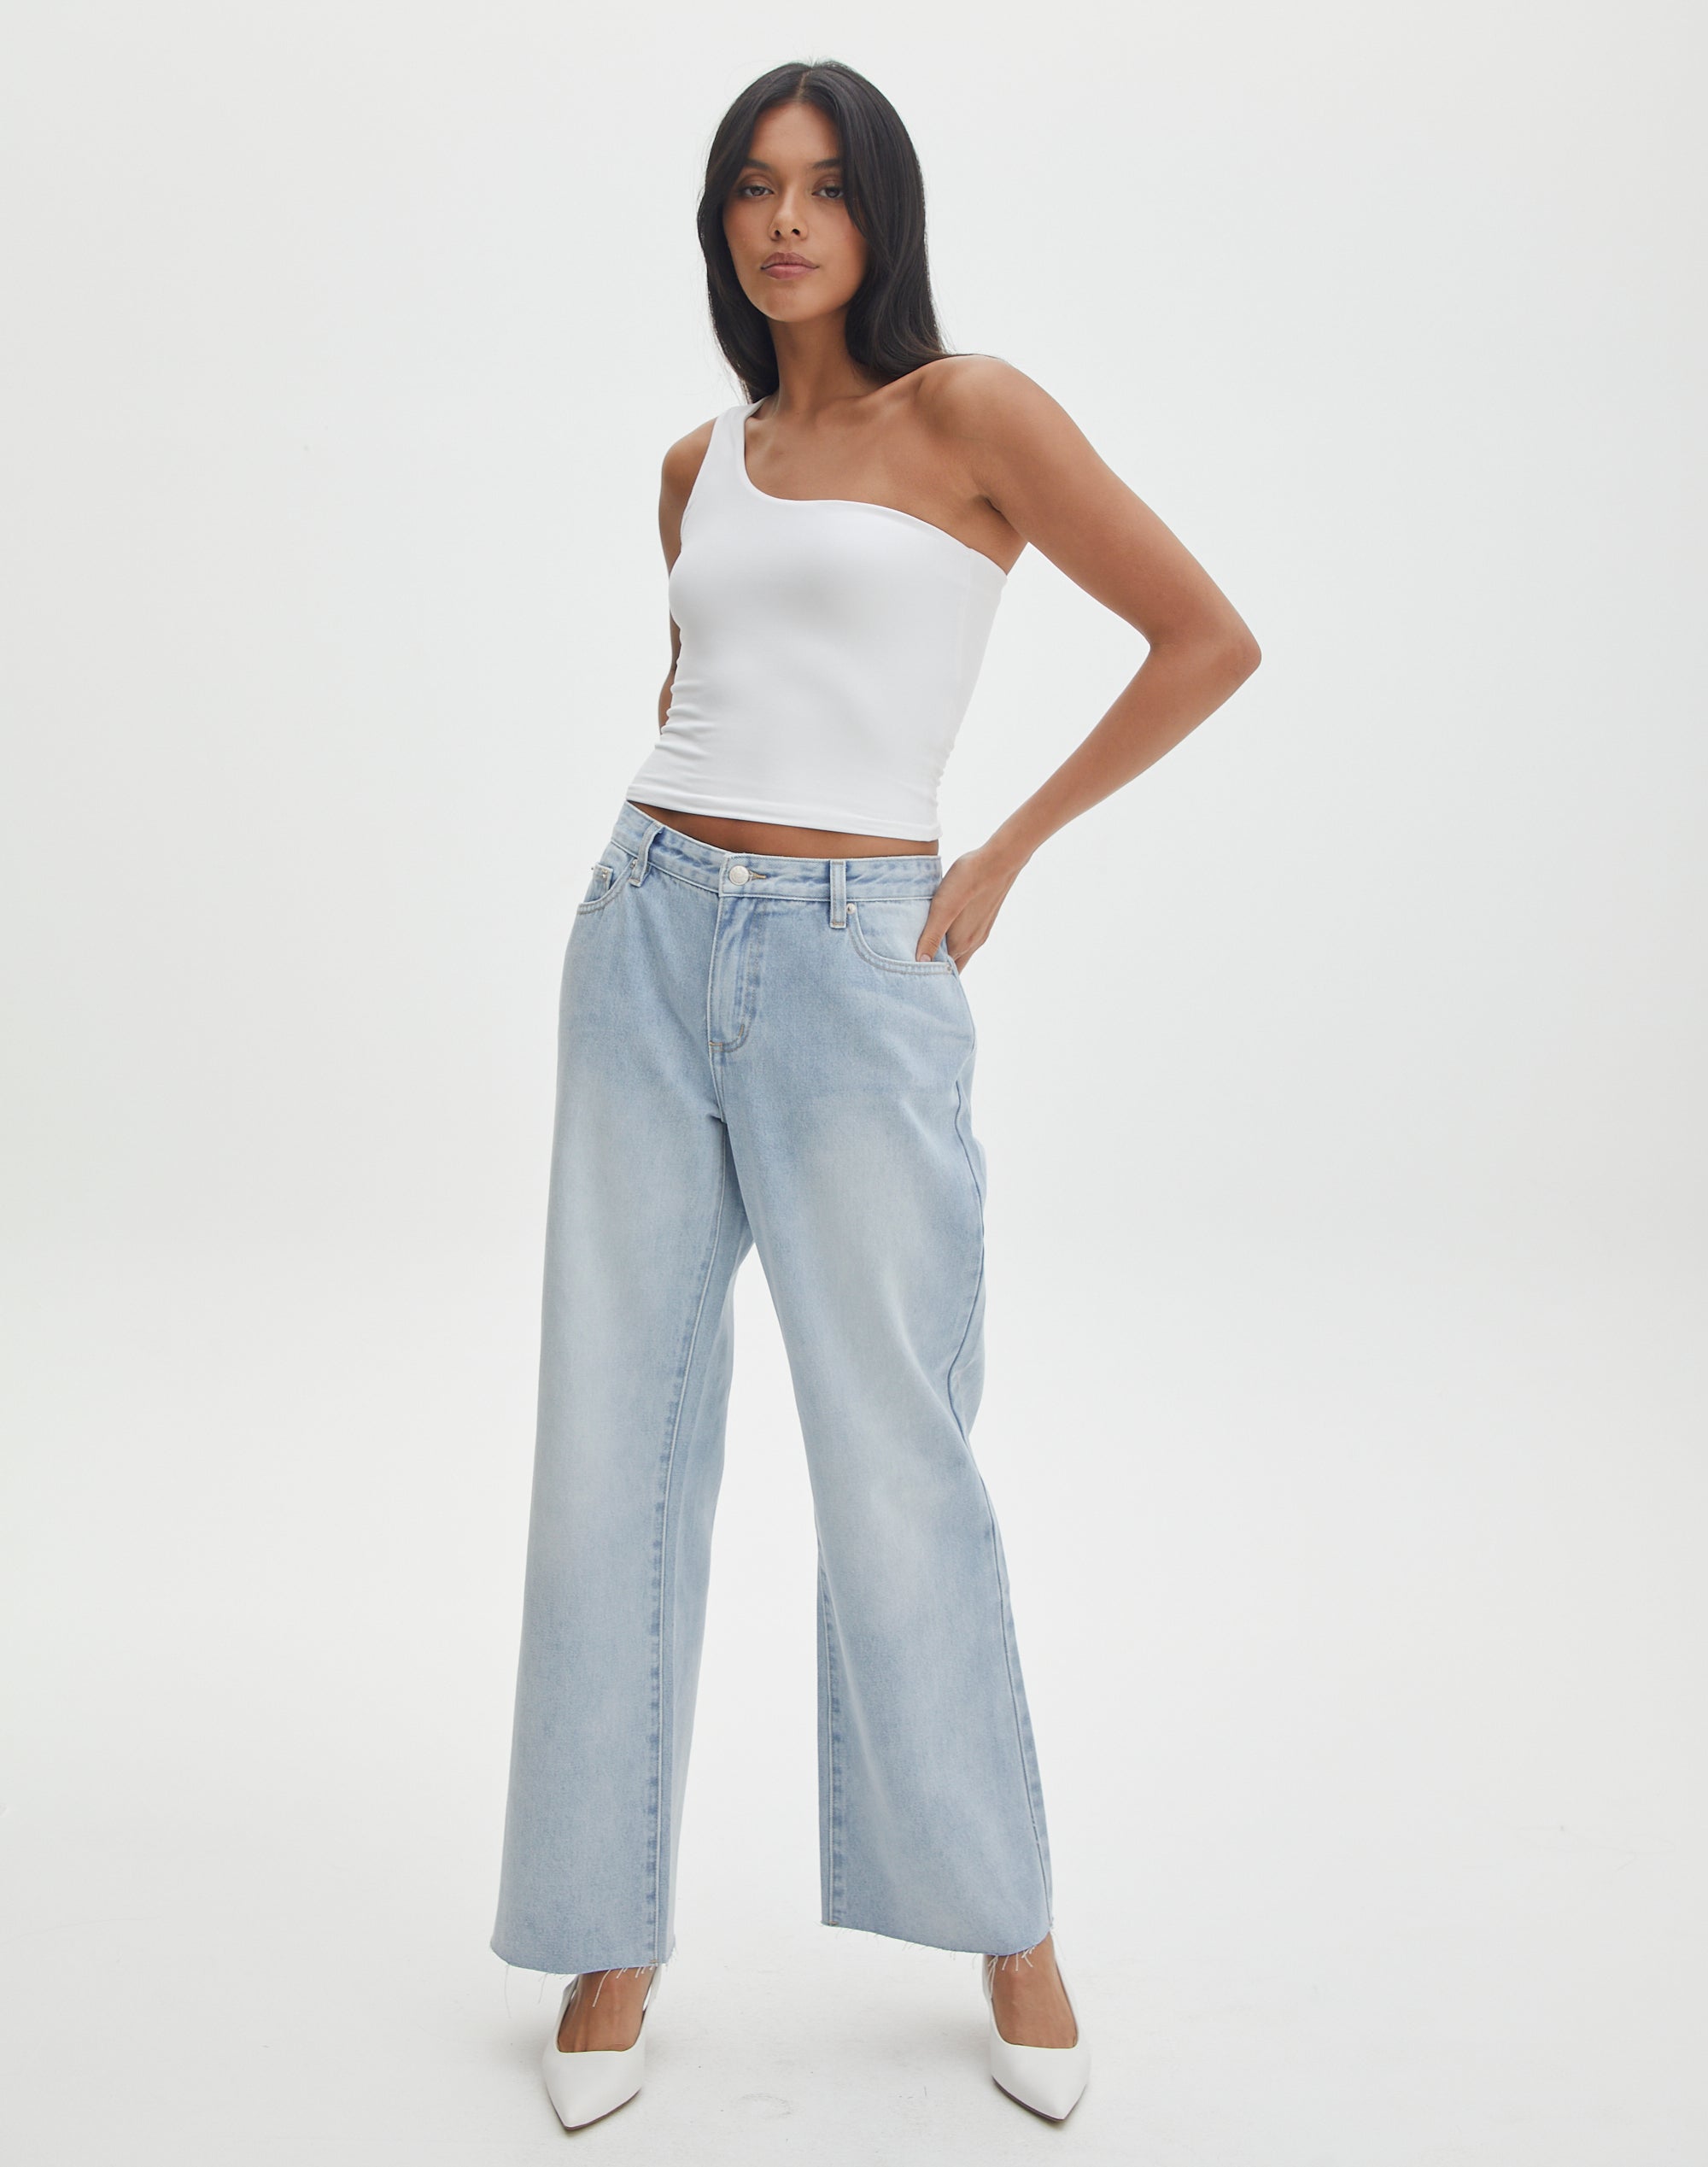 Shop Low Rise Jeans at Glassons. Get The Look With Glassons Jeans